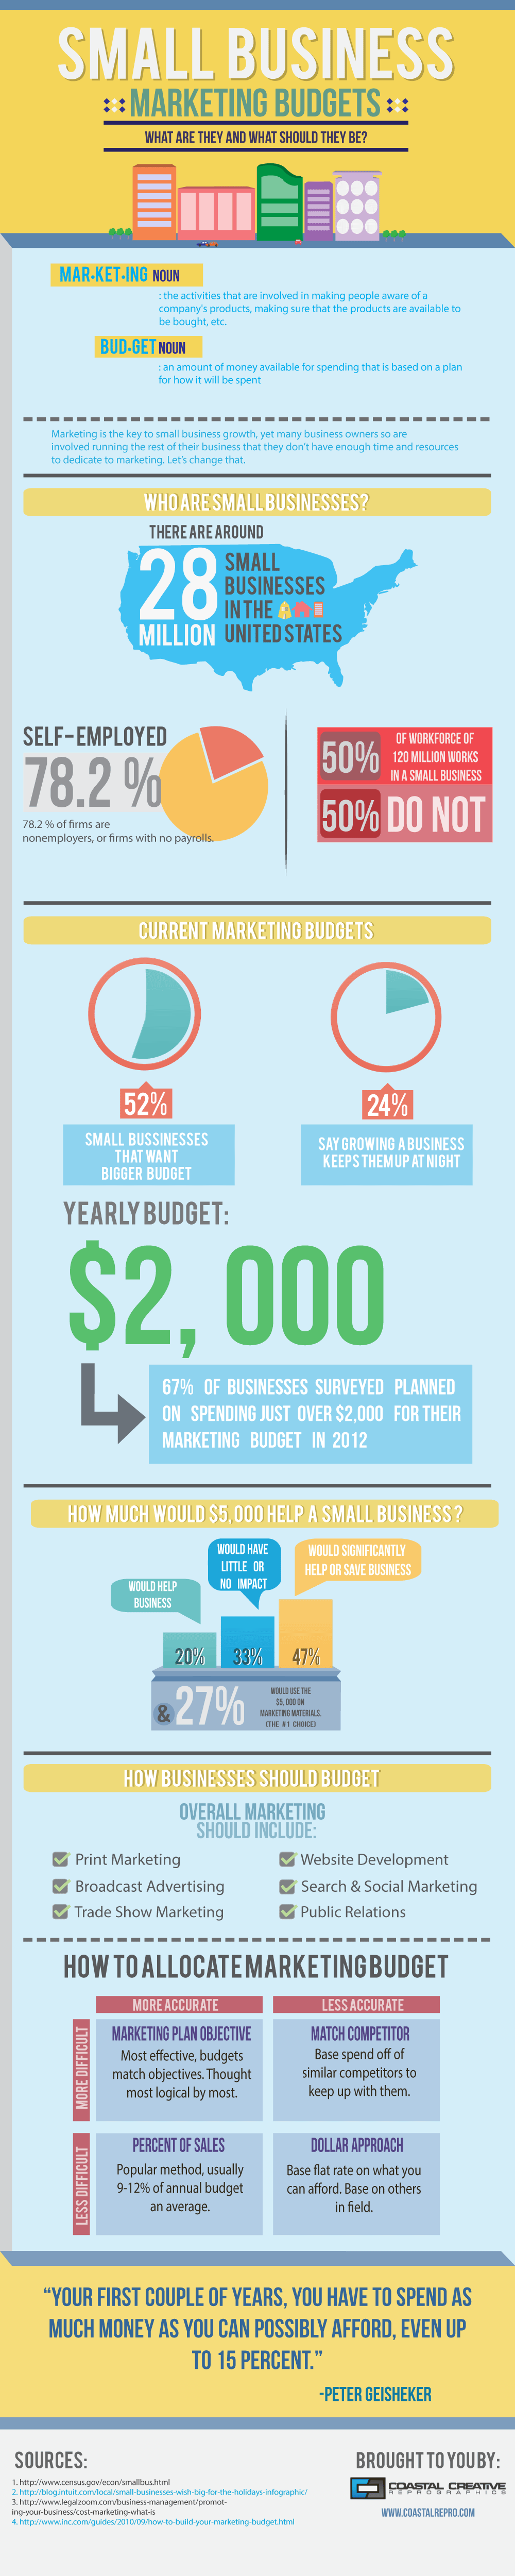 Small Business Marketing Spending-Infographic